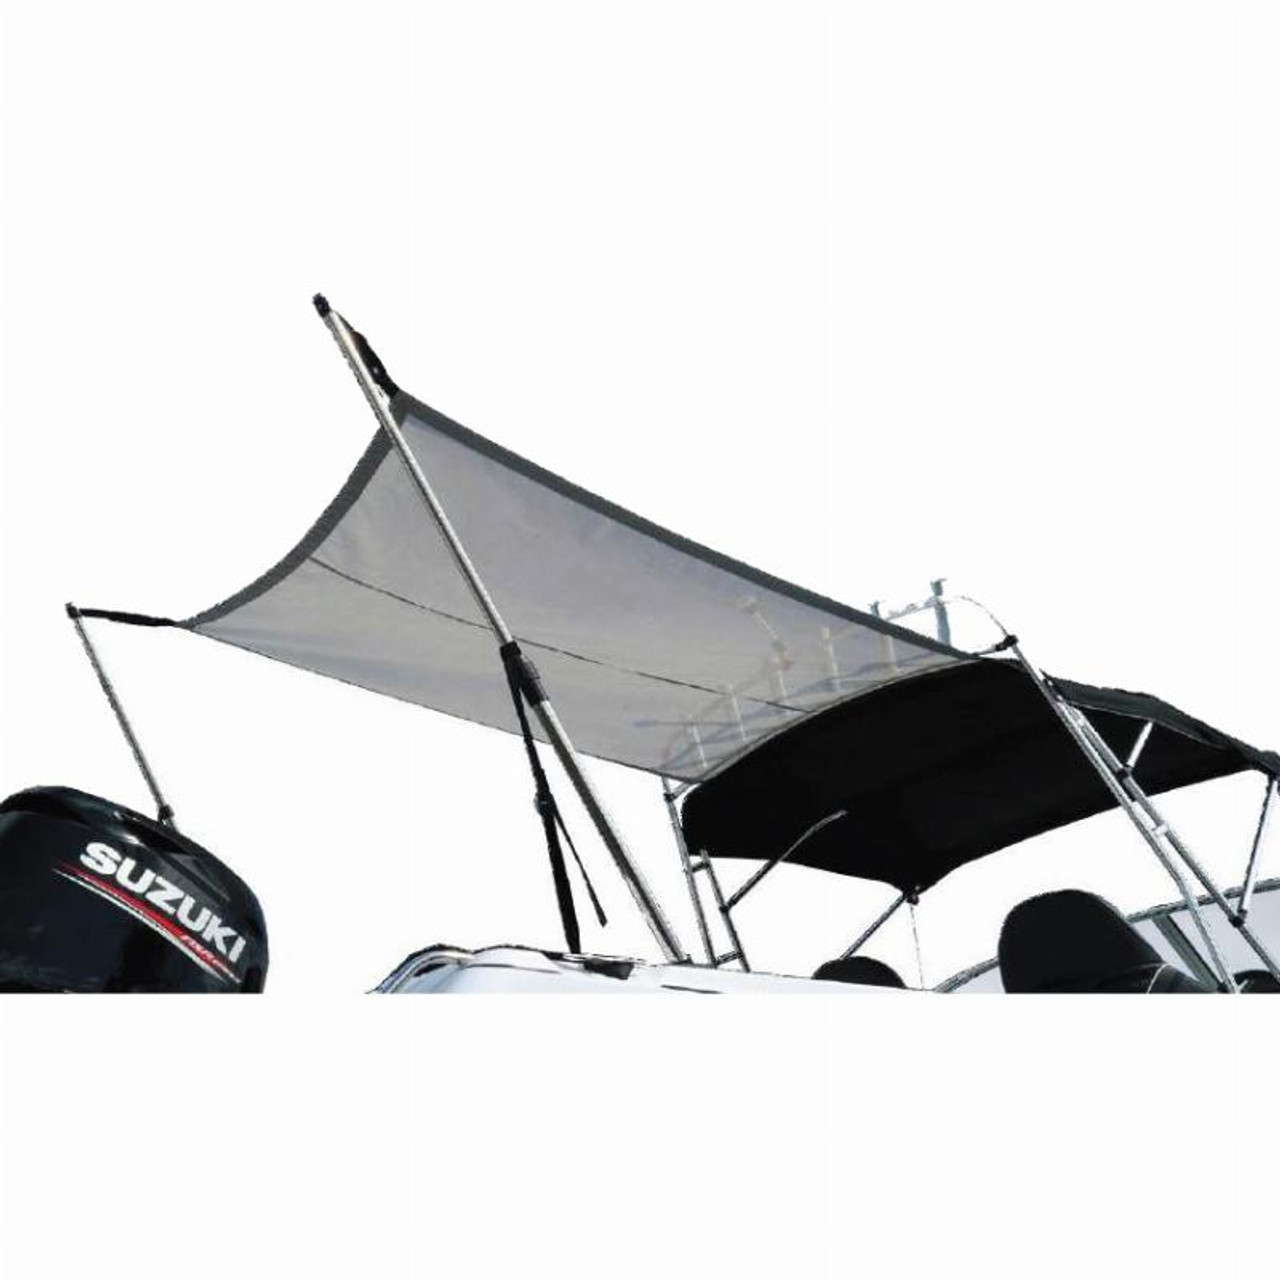 Bimini Boat Top Extension Kit - Expand Your Shade